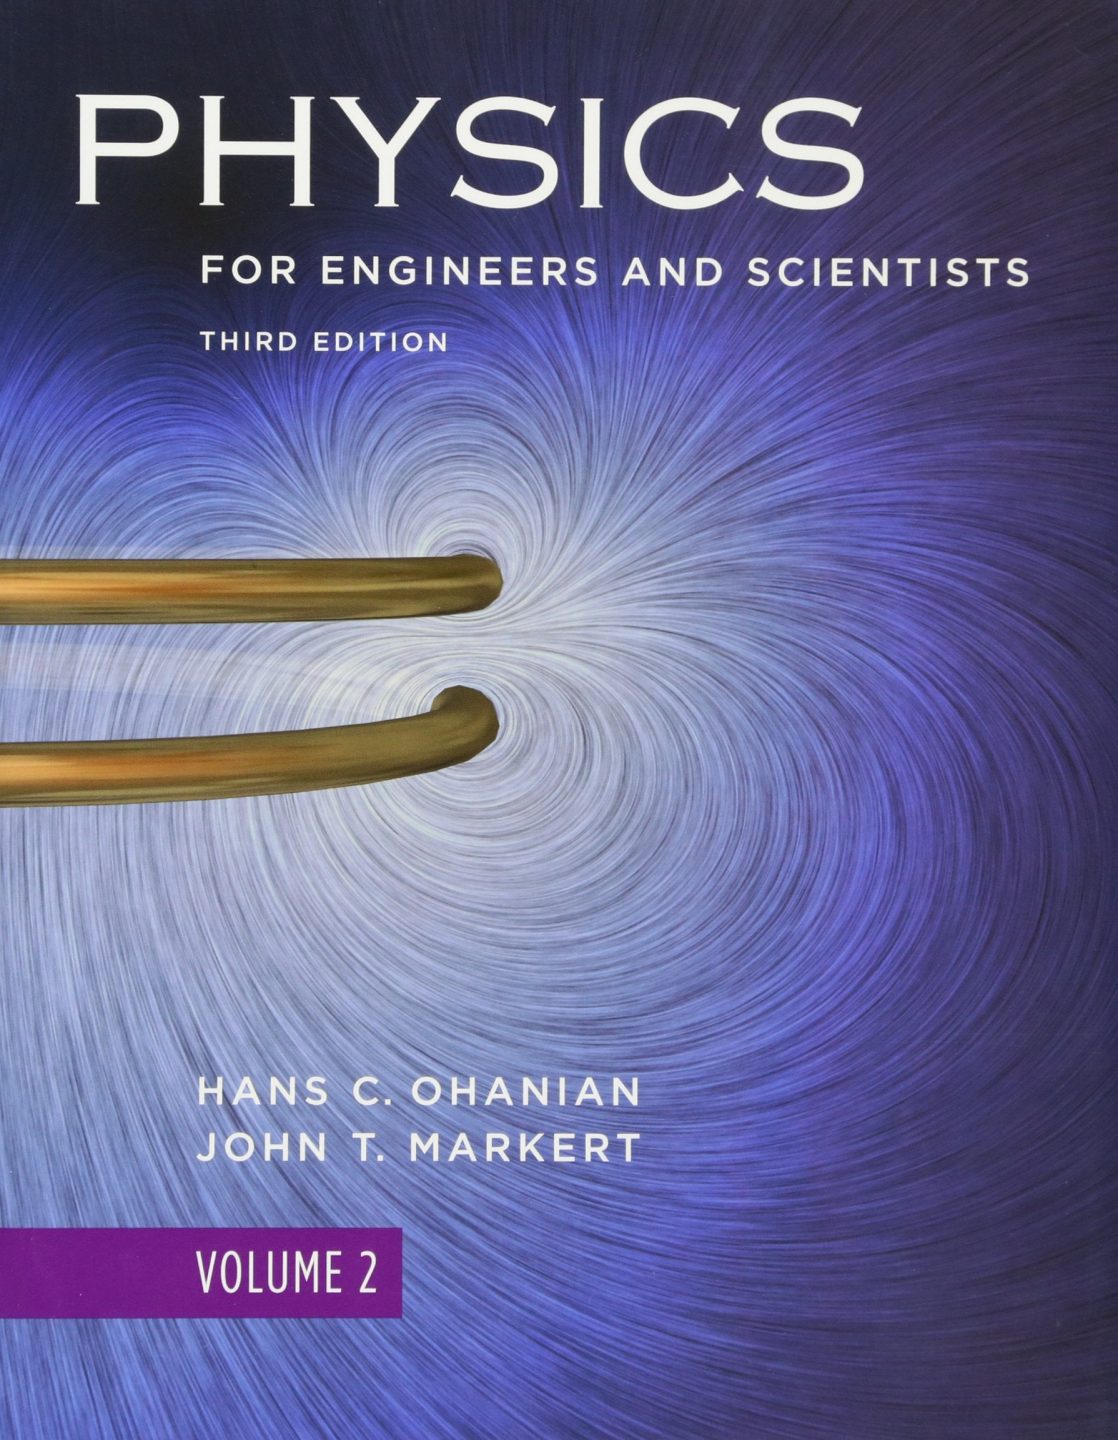 Physics for Engineers and Scientists Vol. 2 3 Edición Hans C. Ohanian PDF